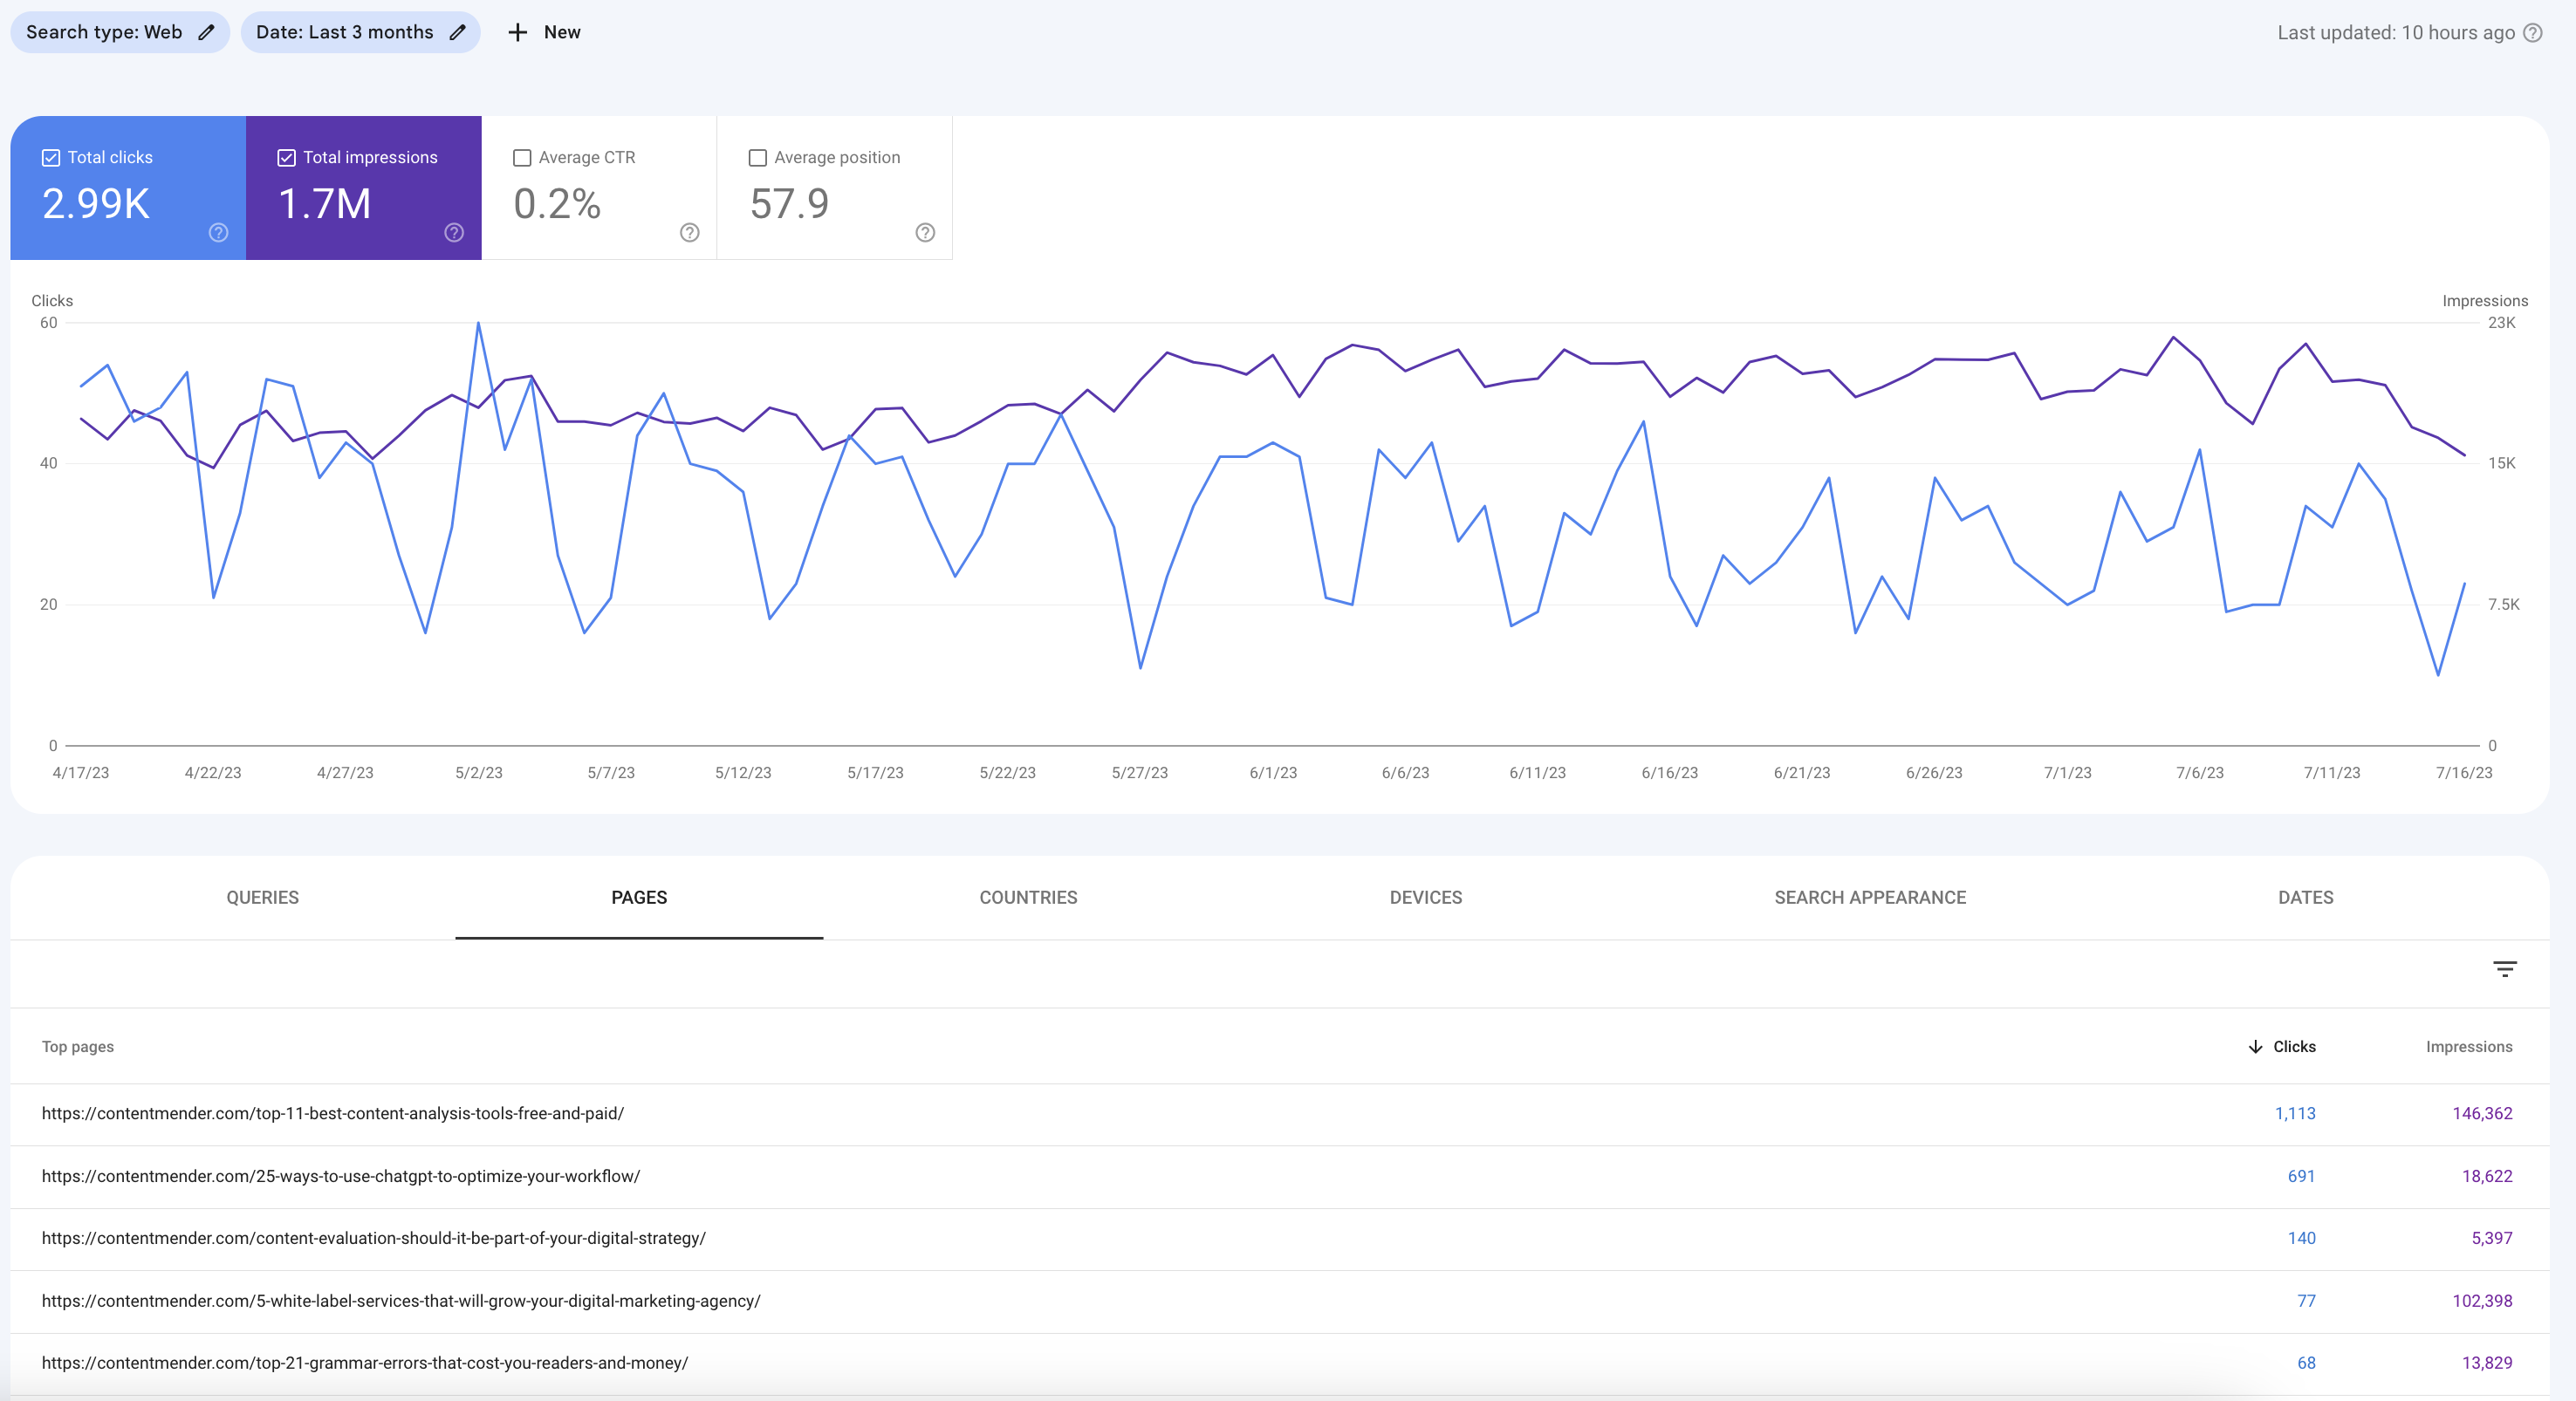 Search Console is a unique platform that helps manage several tasks for website admins